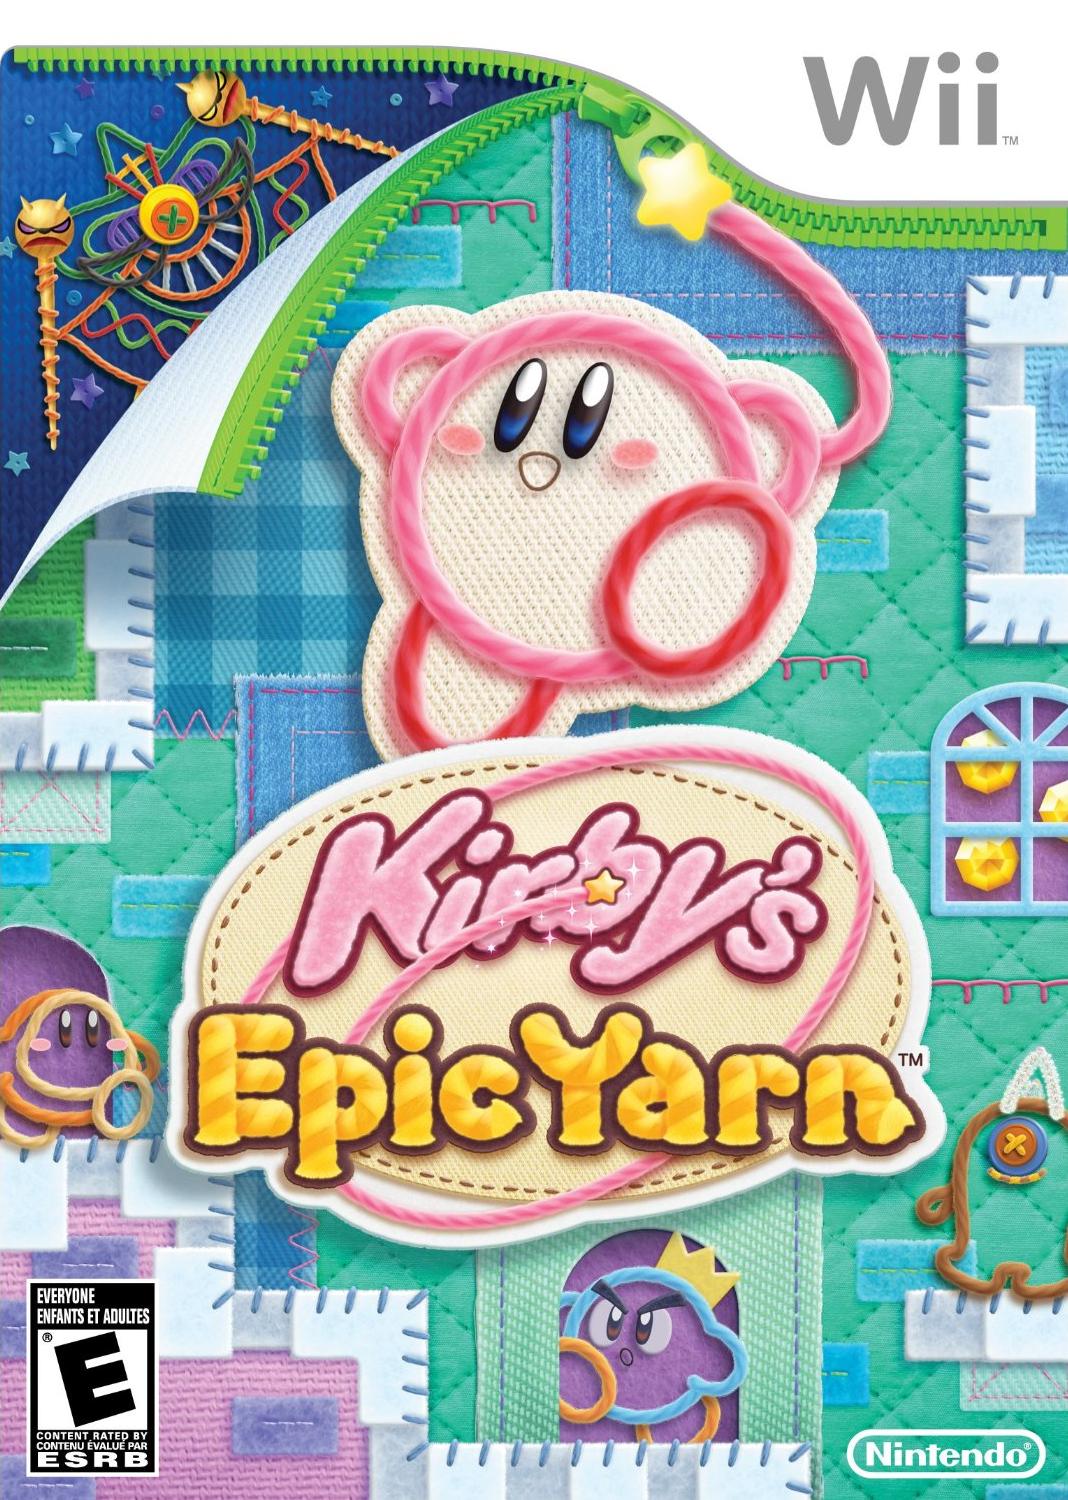 why is my 3ds doing this whenever i try to open kirby epic yarn